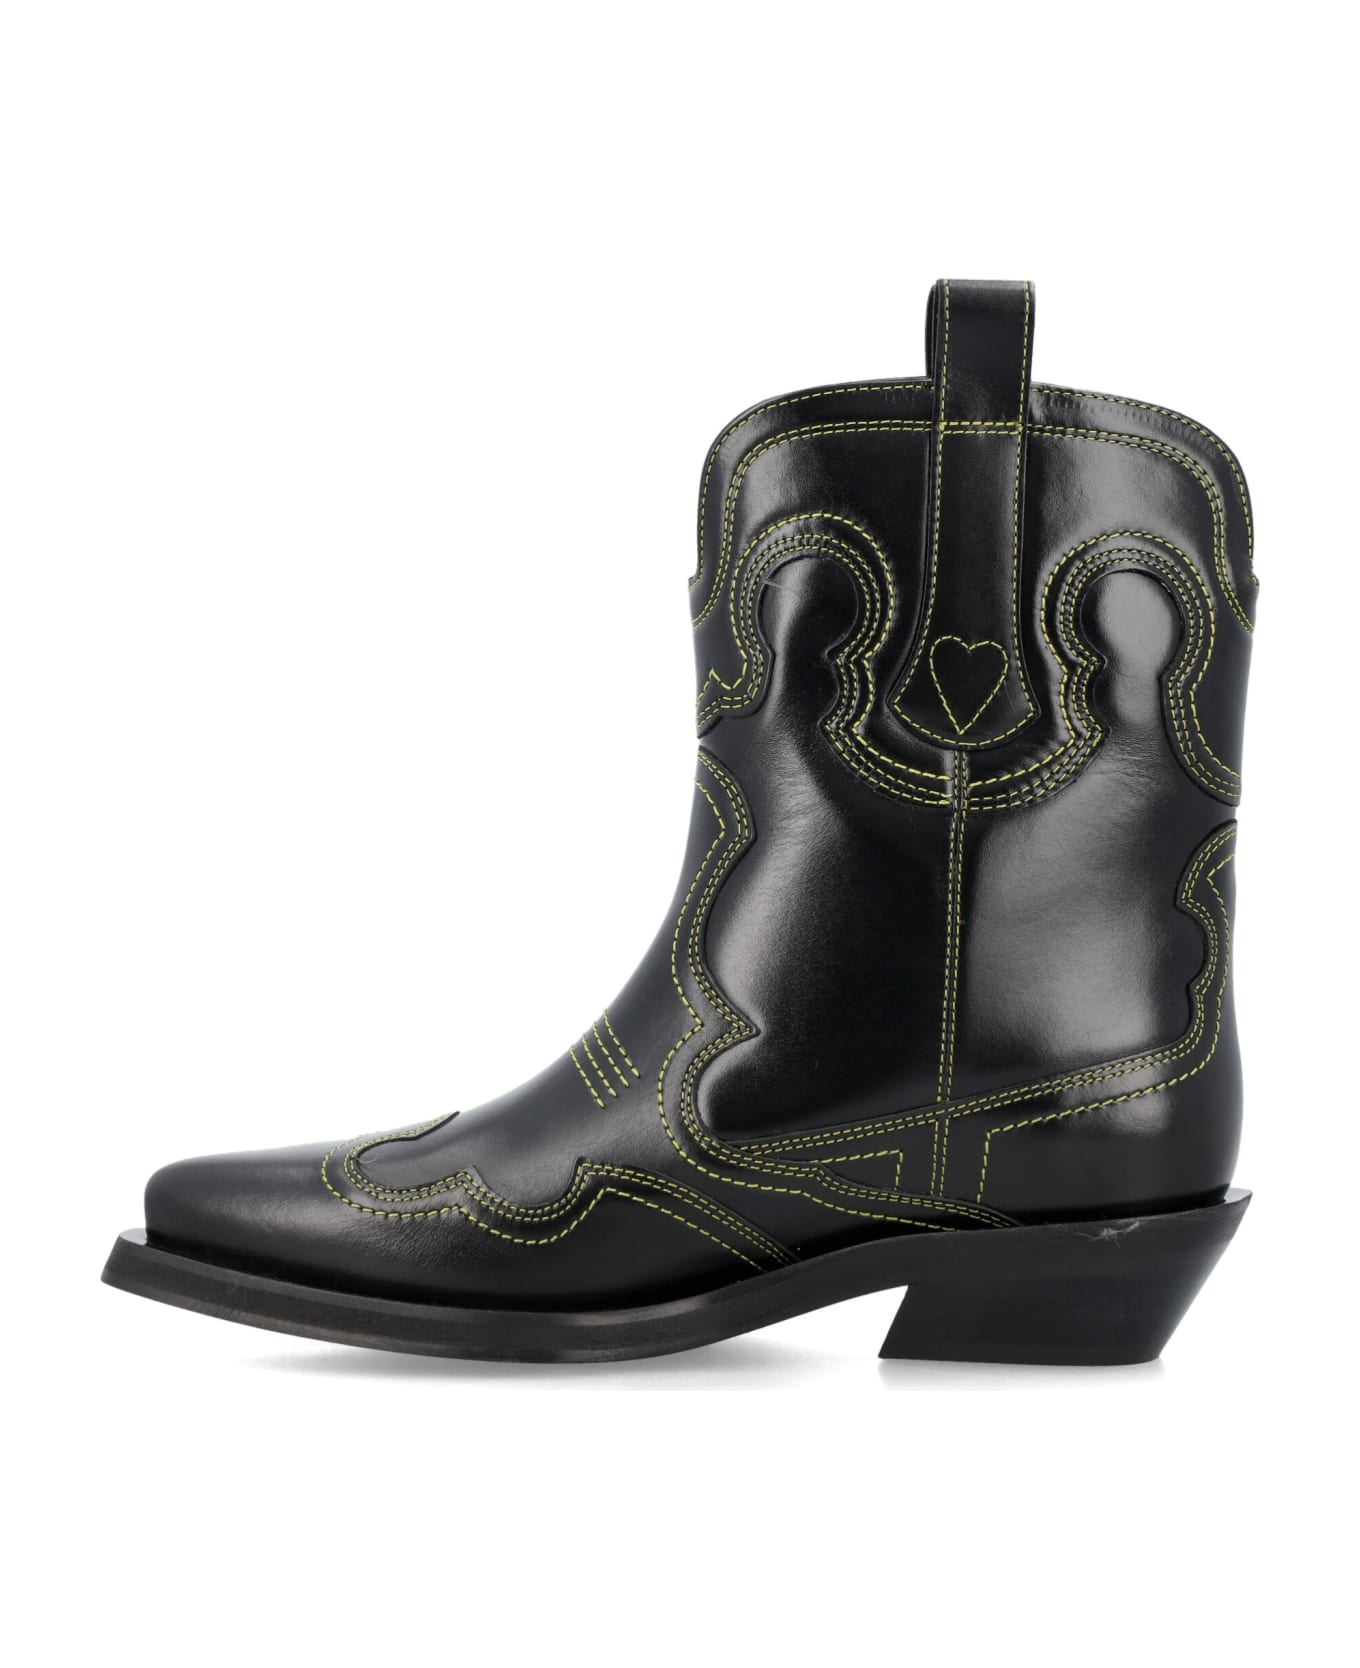 Ganni Embroidered Low Western Boots - BLACK YELLOW ブーツ